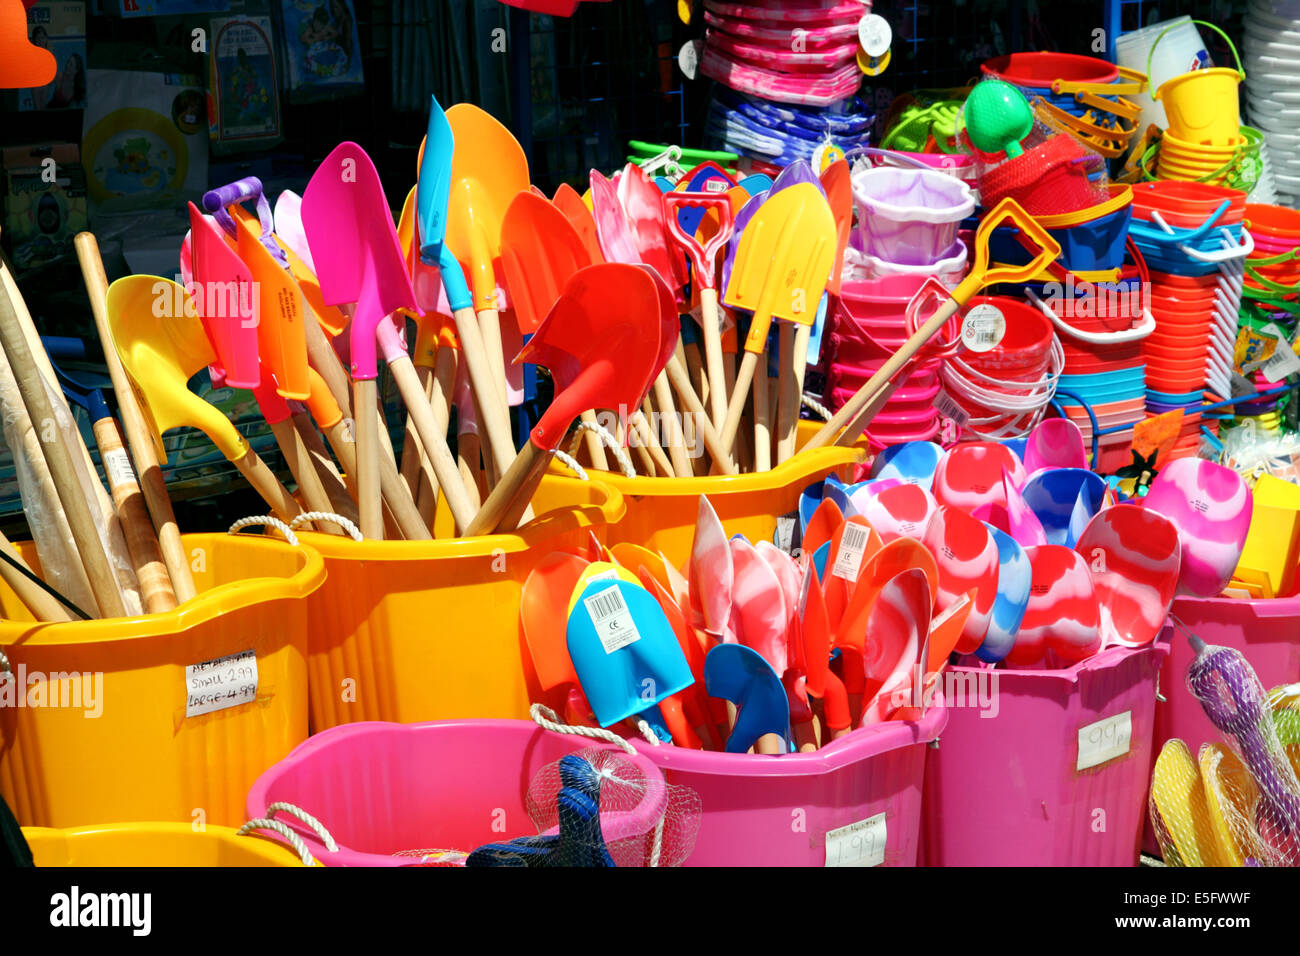 A shop display of brightly coloured pink and yellow buckets and spades. Stock Photo